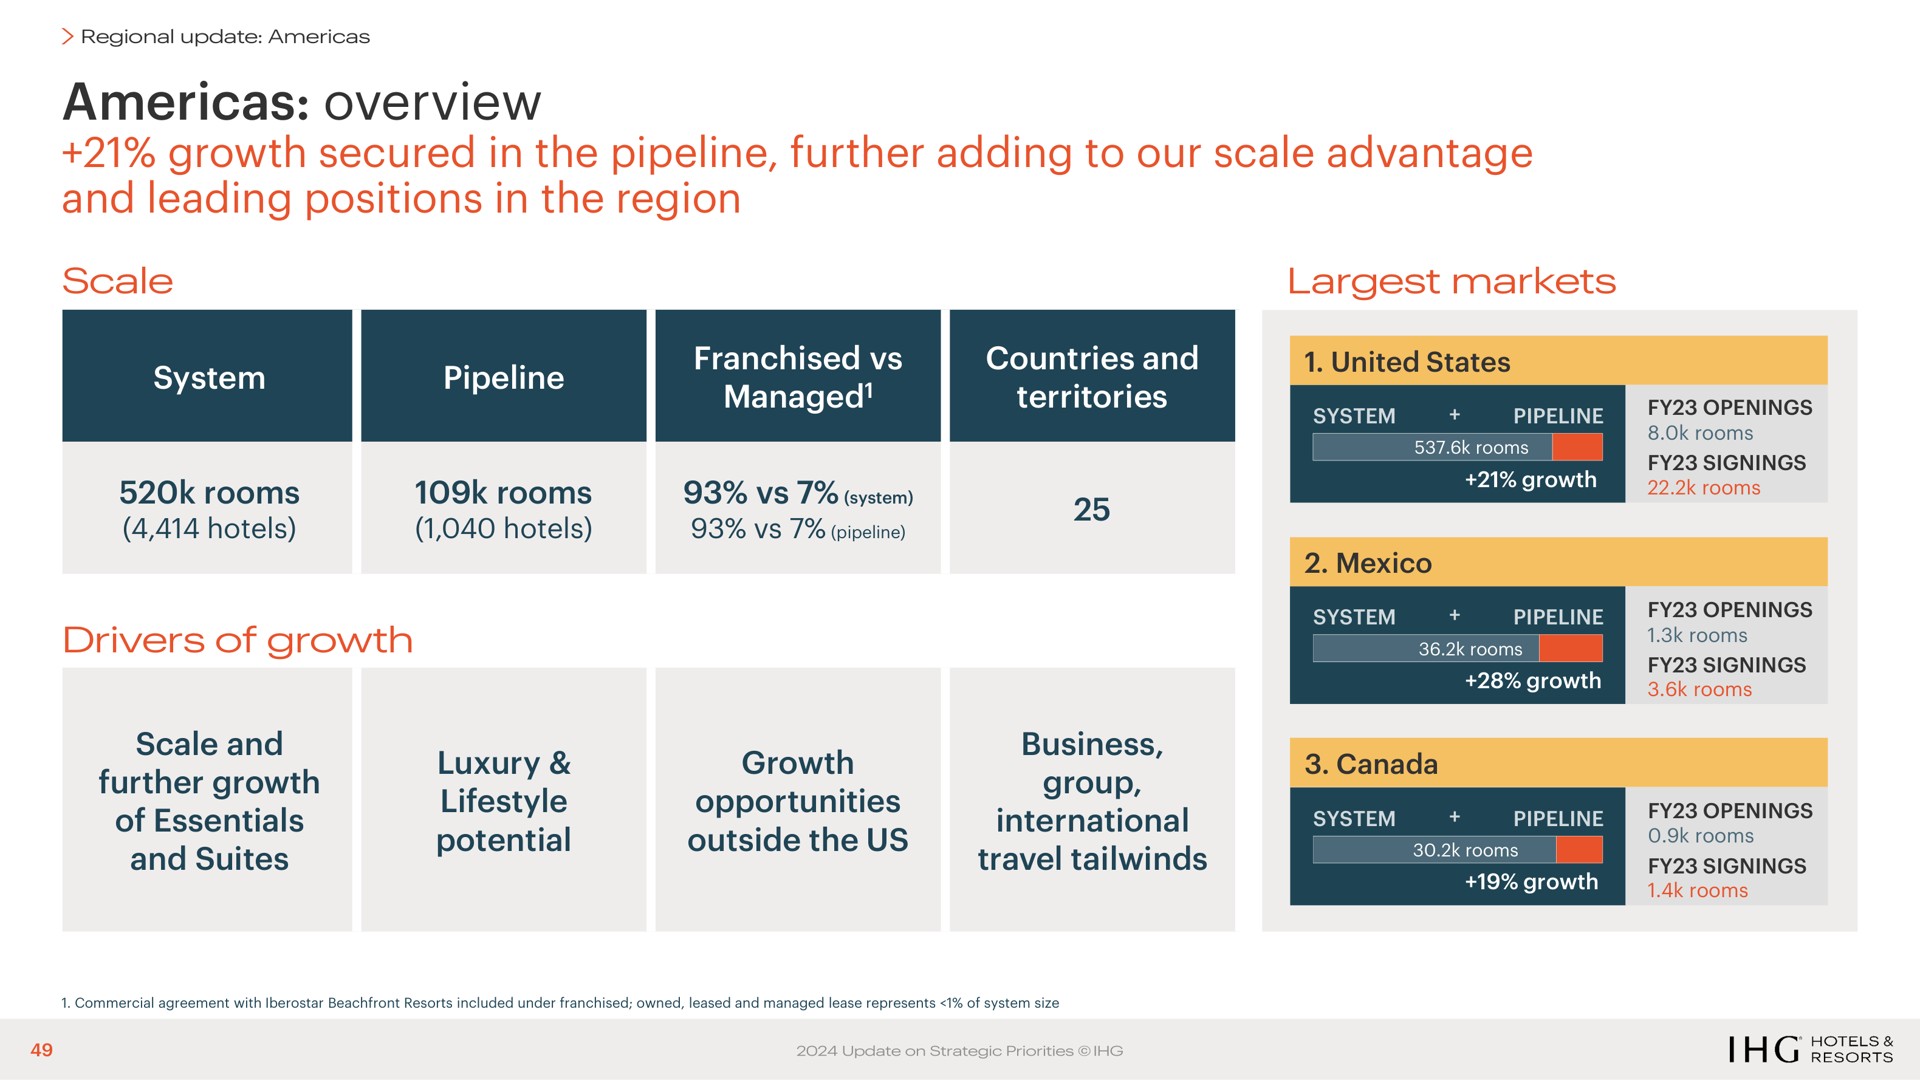 overview growth secured in the pipeline further adding to our scale advantage and leading positions in the region | IHG Hotels